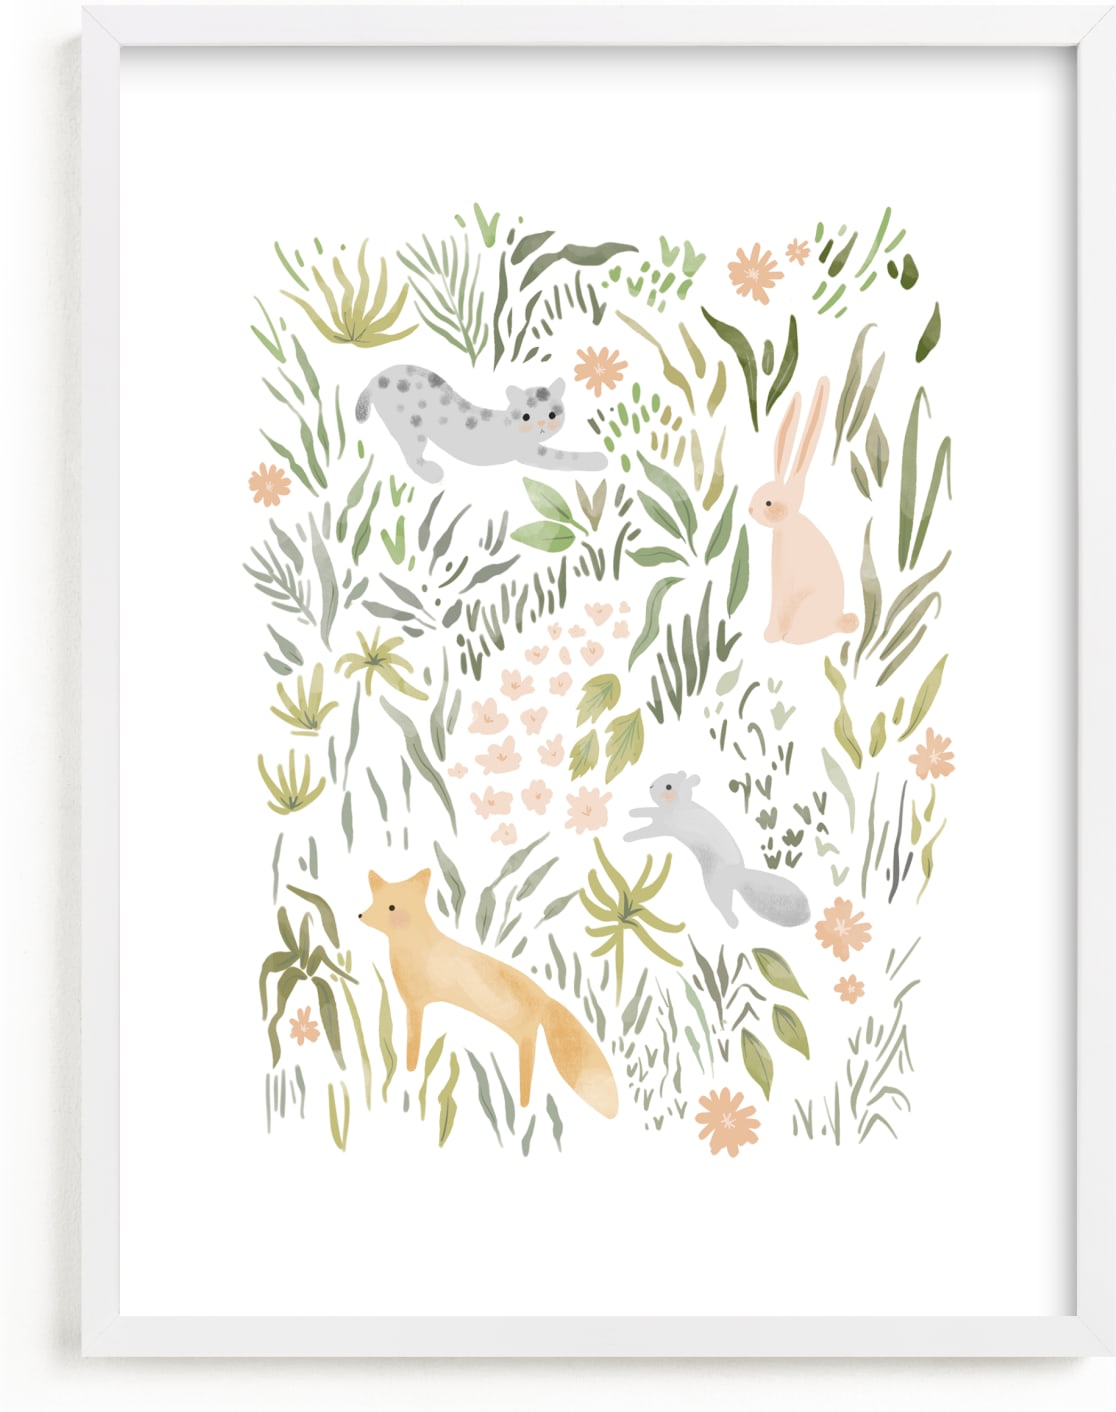 This is a colorful art by Hannah Williams called Flora and Fauna.